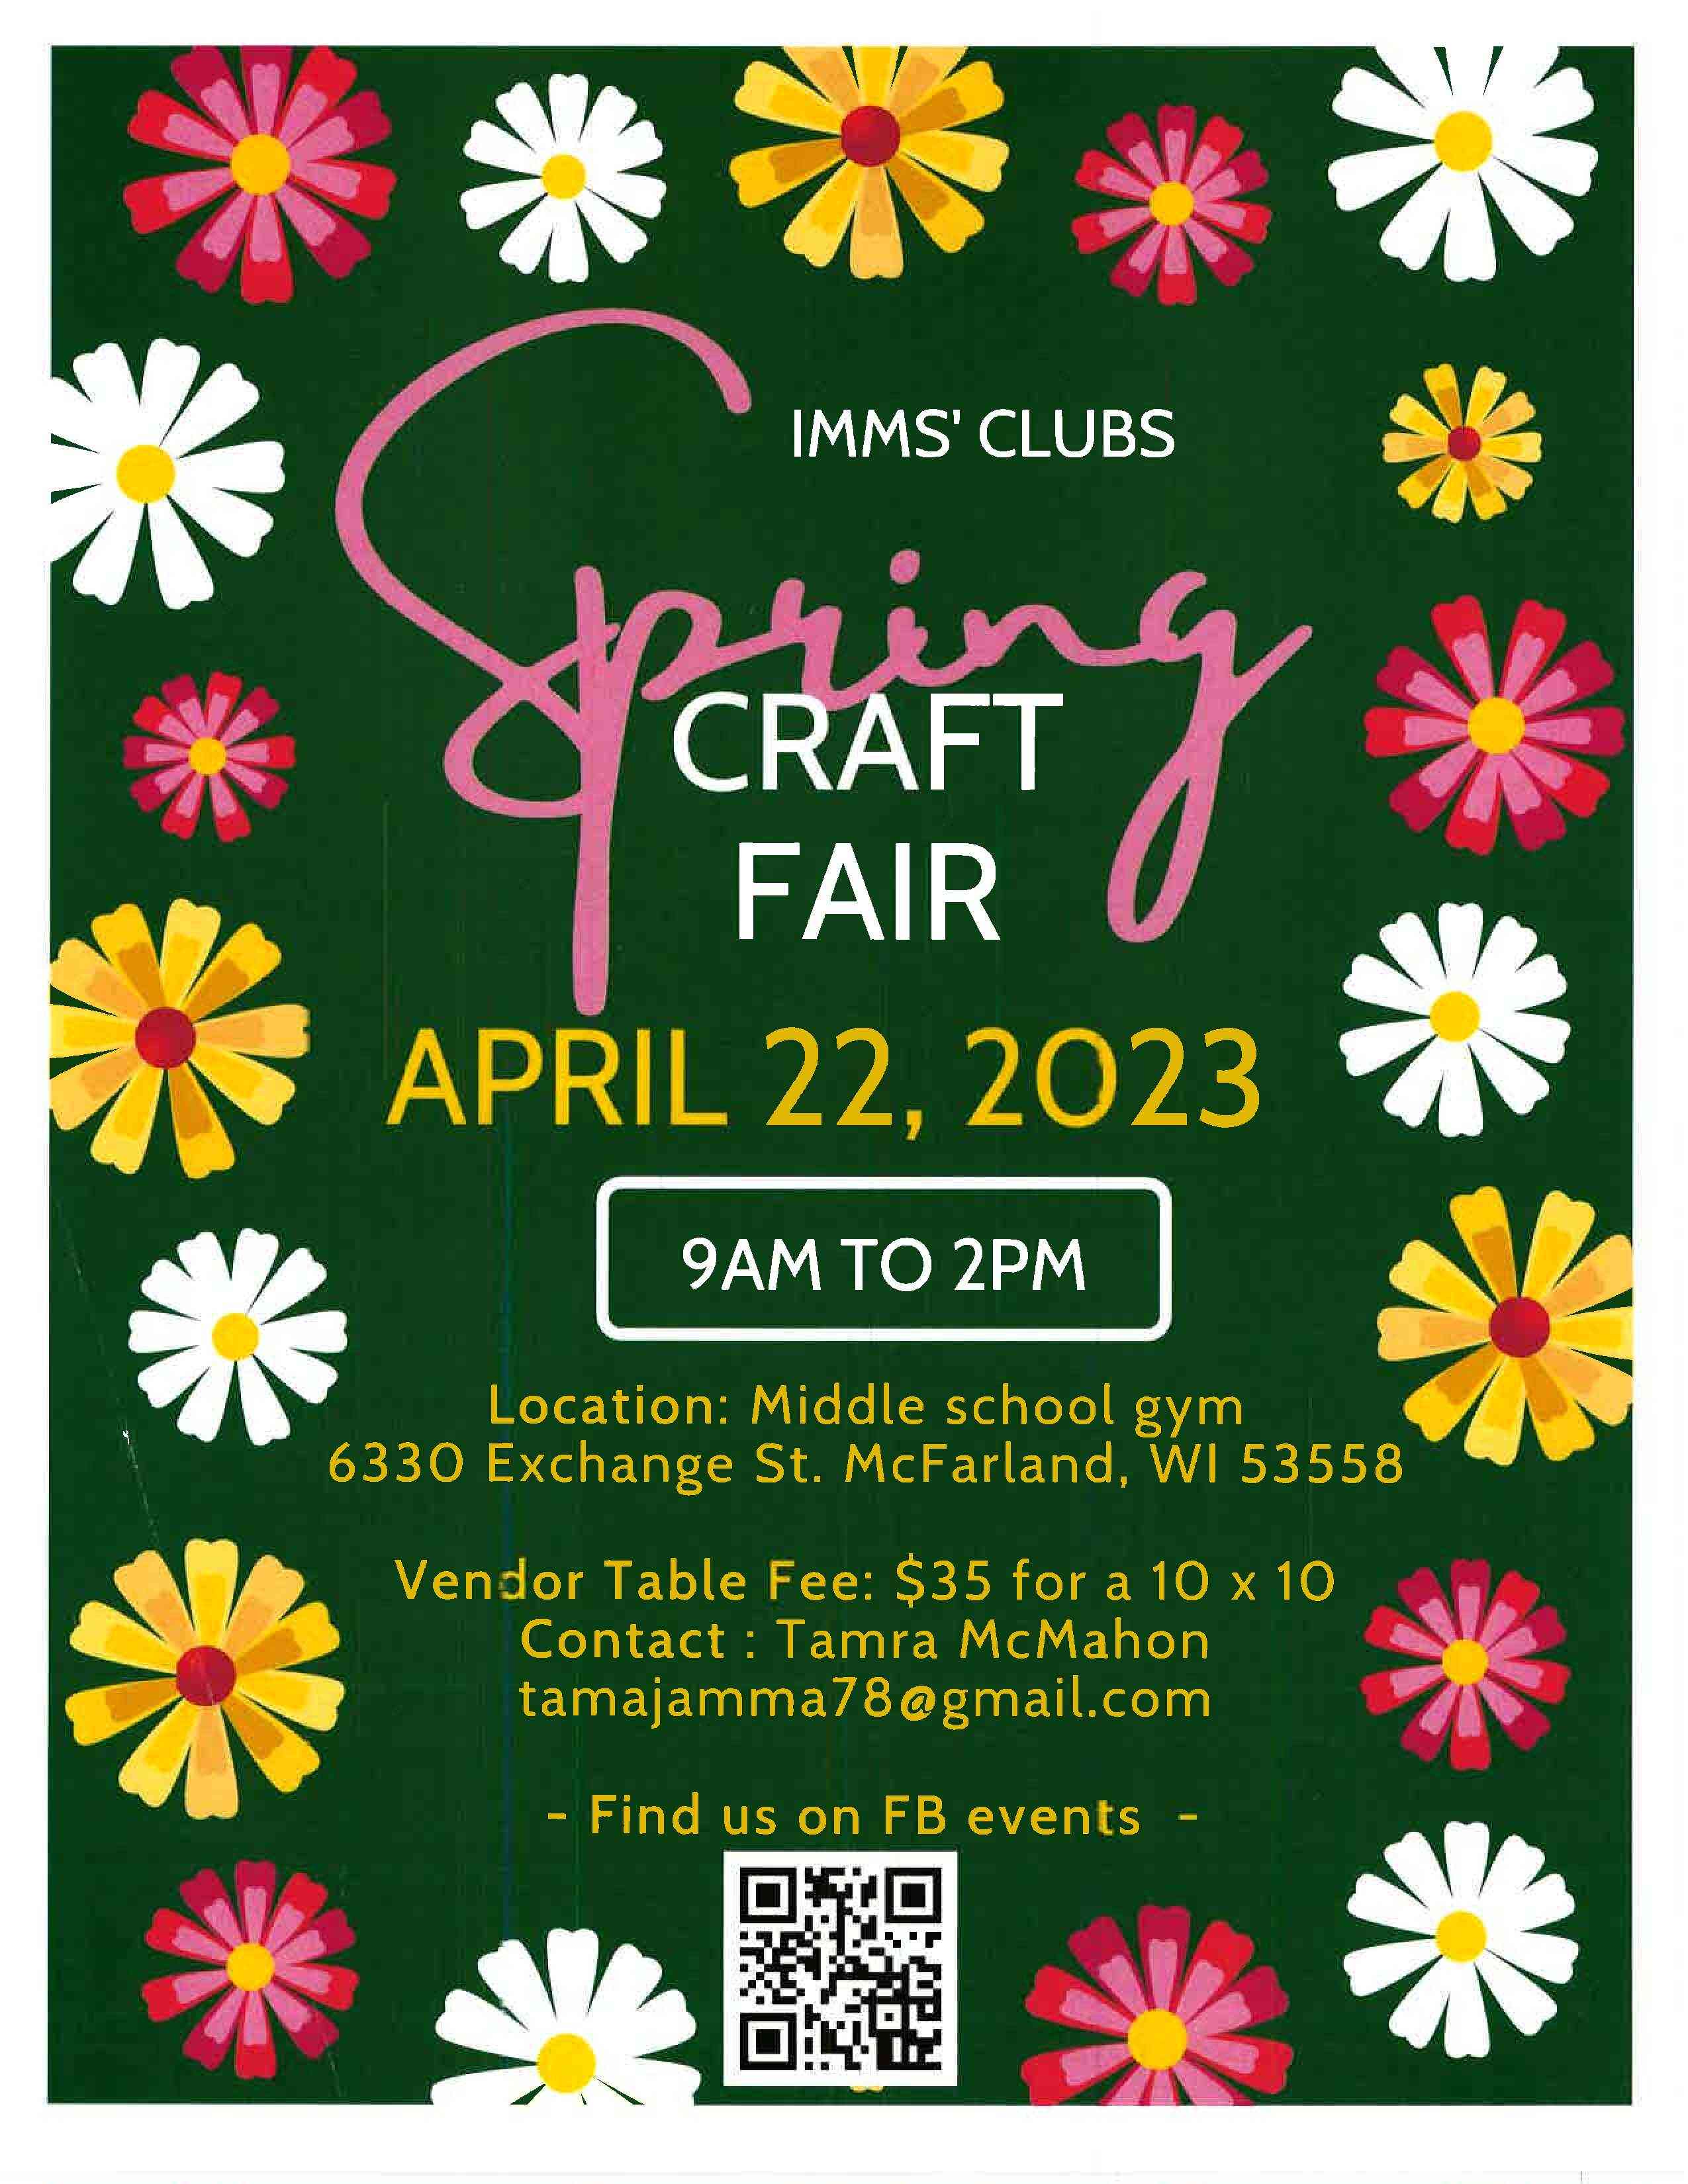 IMMS Clubs Spring Craft Fair Image